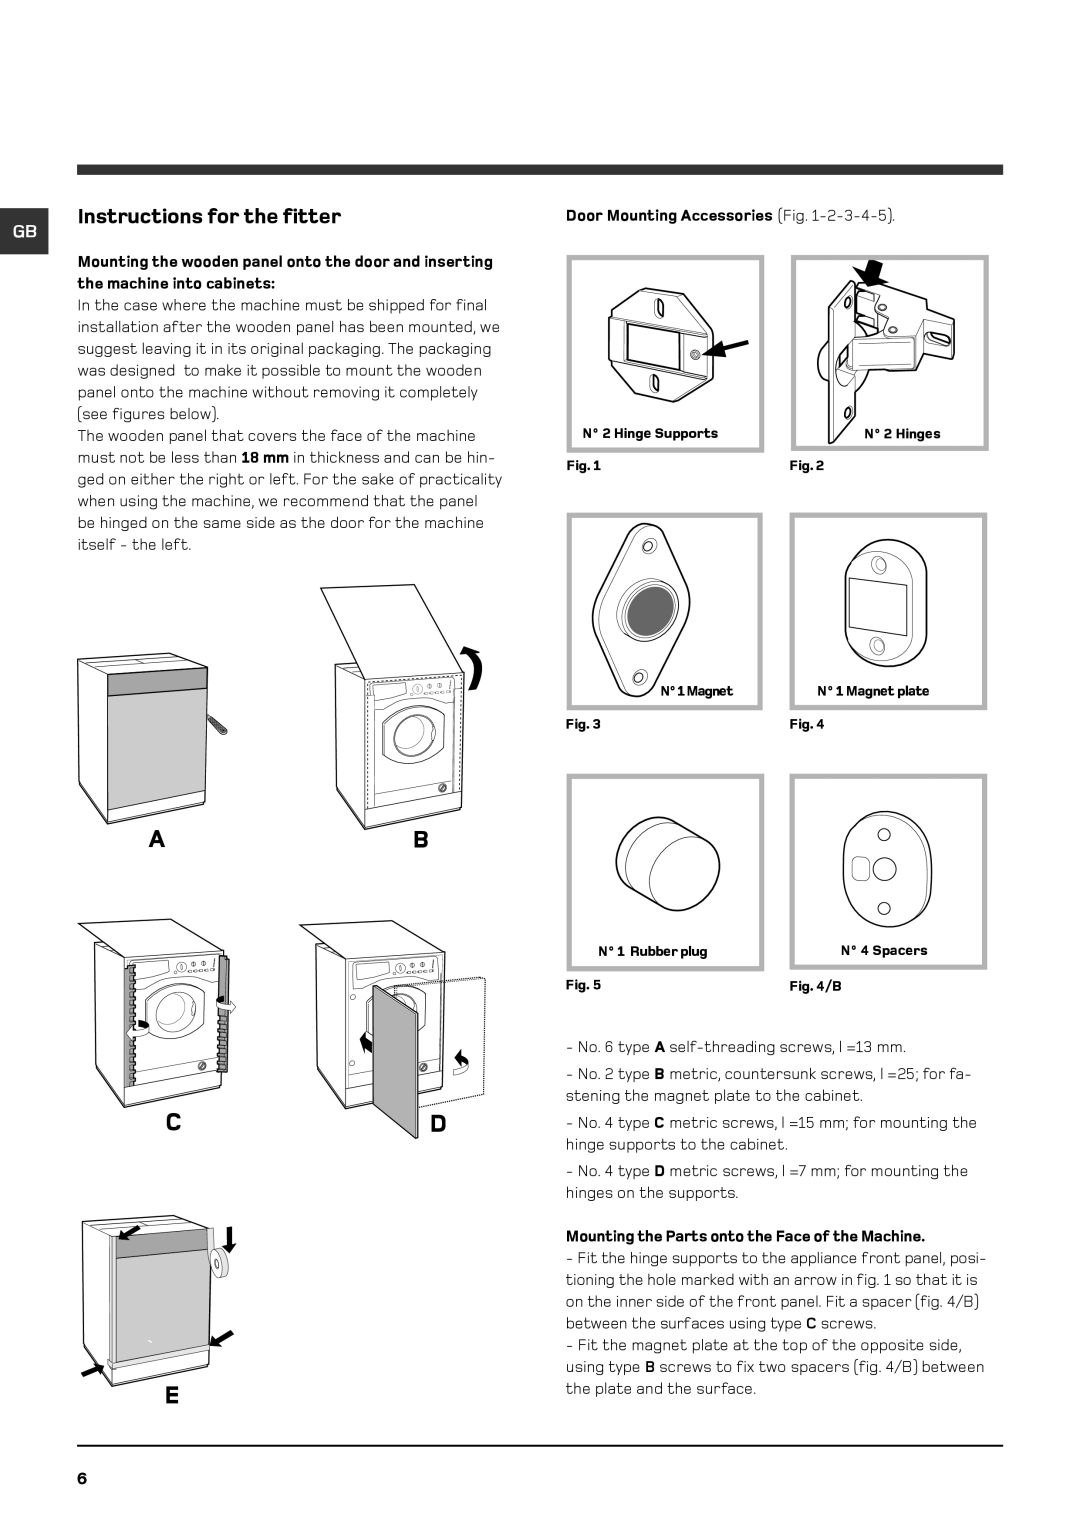 Hotpoint BHWD 129 manual Ab Cd E, Instructions for the fitter 